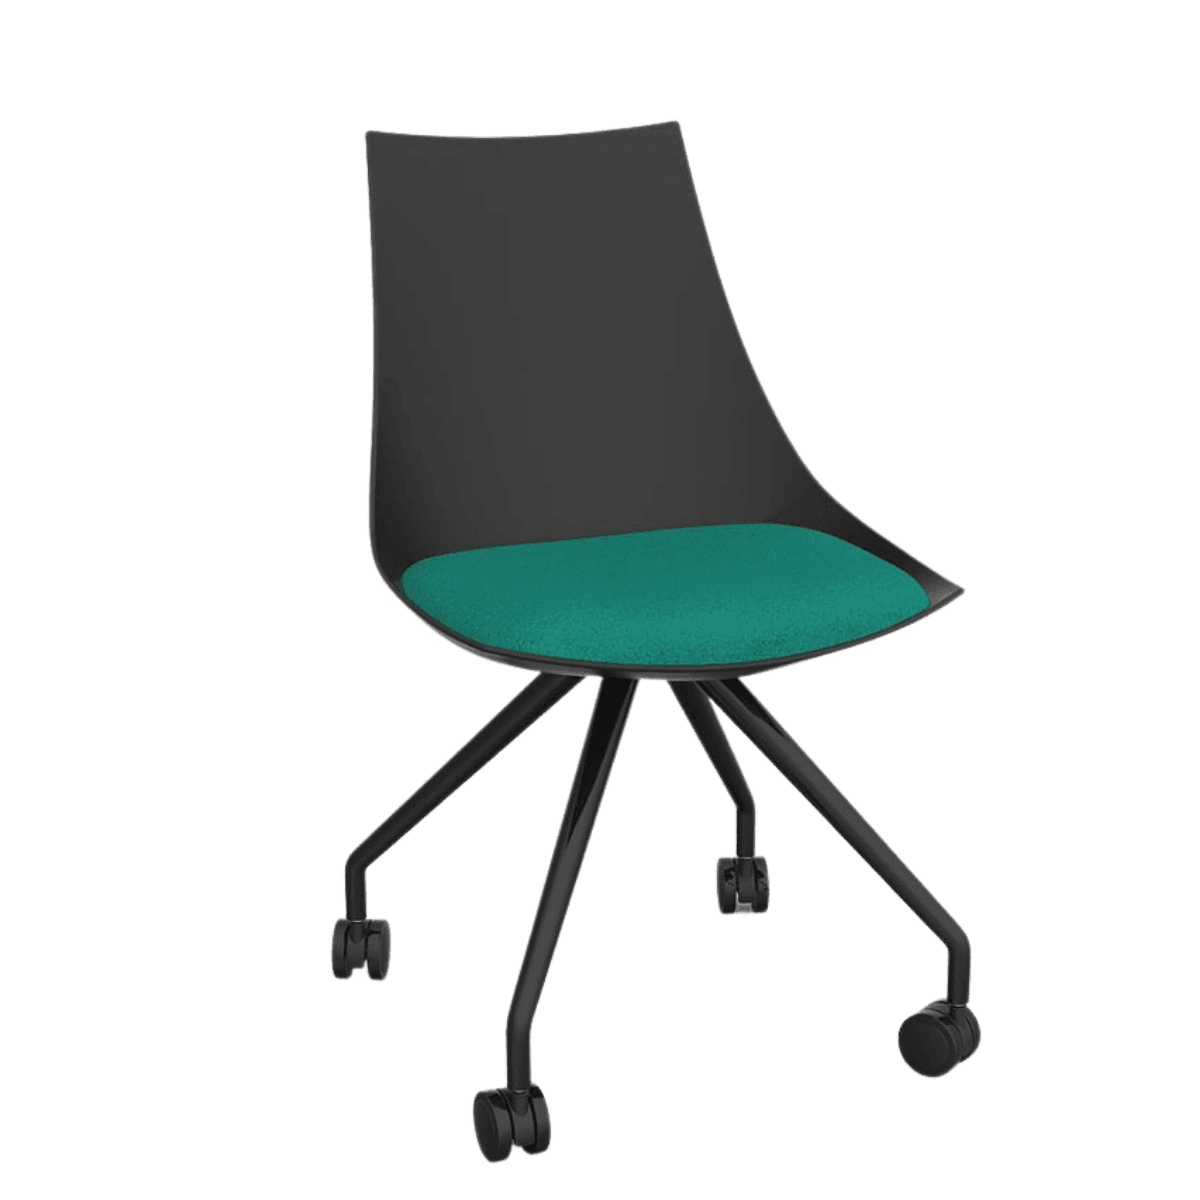 Luna Black Chair with Castor Base - Office Furniture Company 